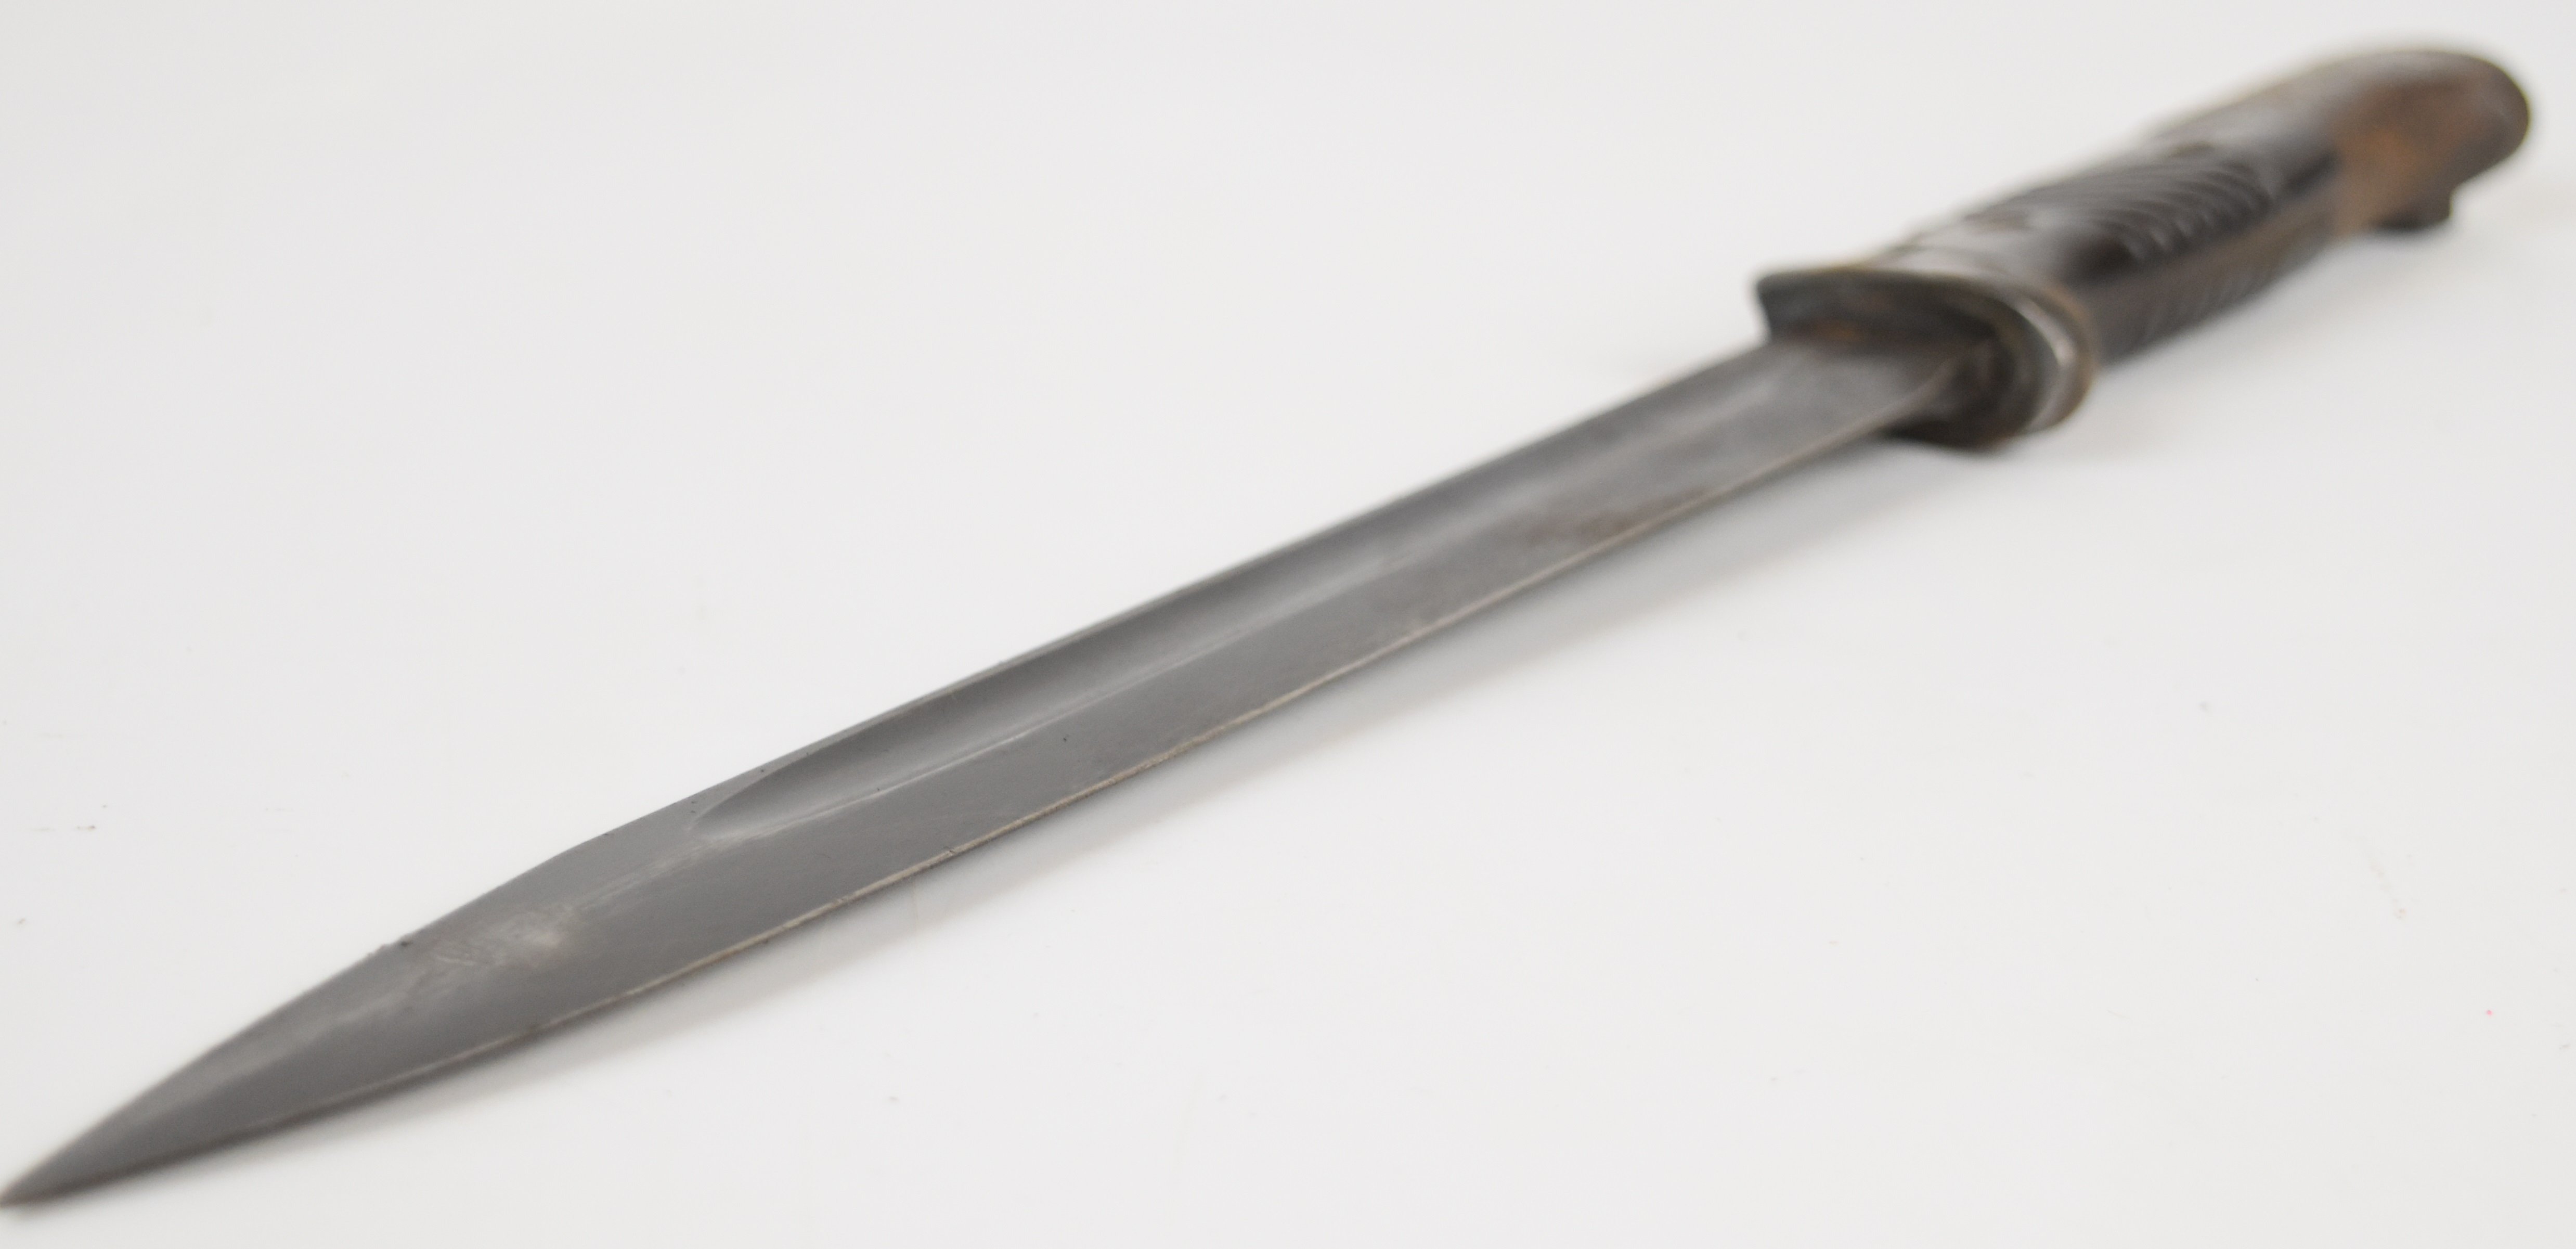 German WW2 K98 bayonet with Bakelite grips, flashguard, 43 cgh and 3769 to ricasso, 25cm fullered - Image 13 of 20